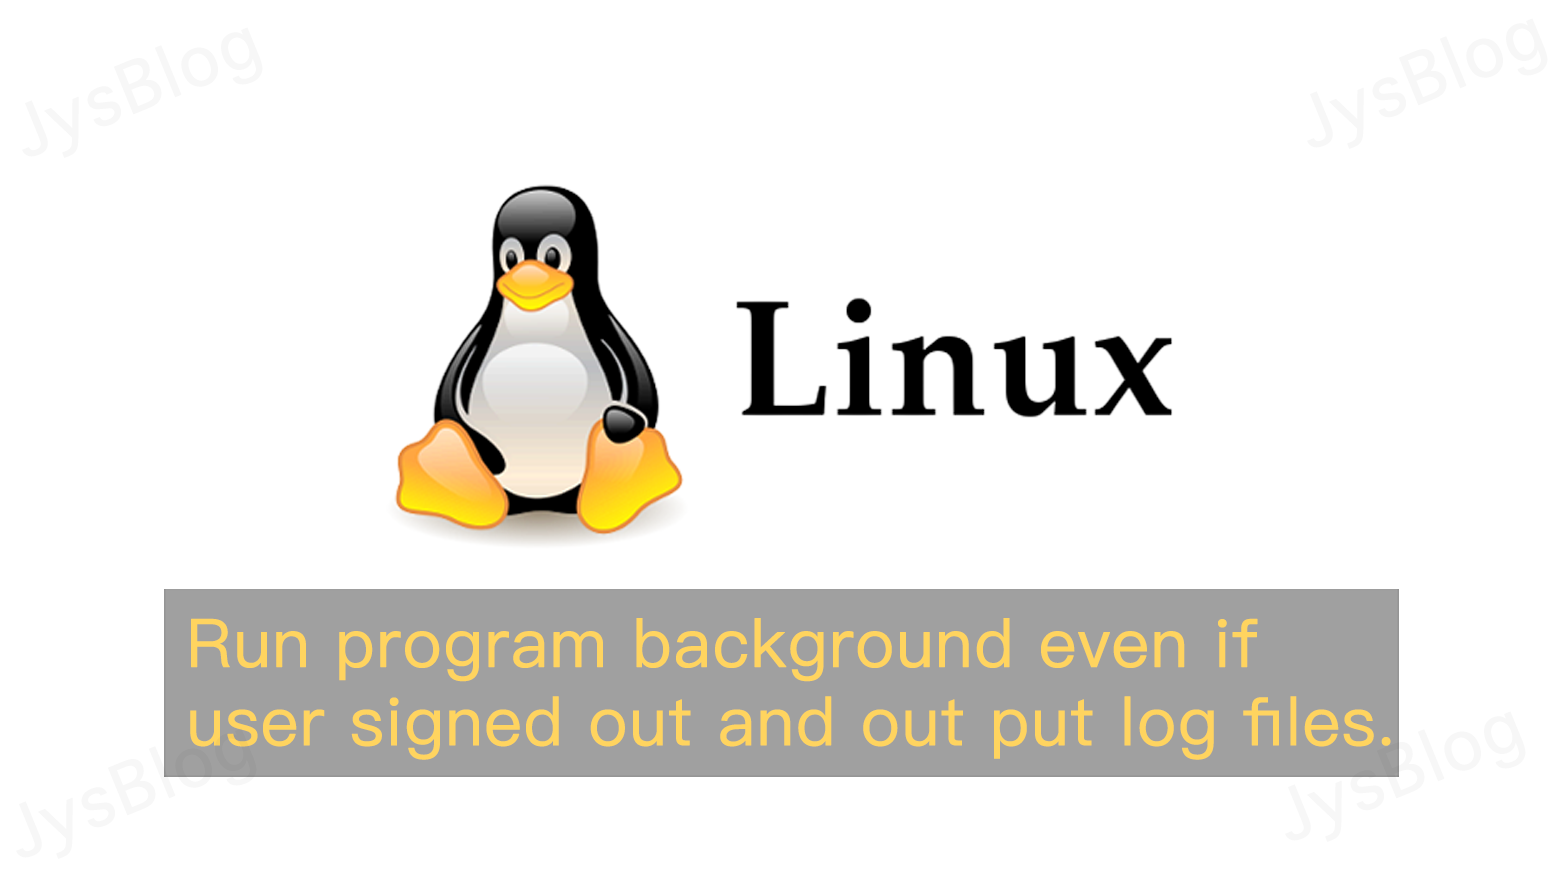 [Linux] Run program background even if user signed out and out put log files